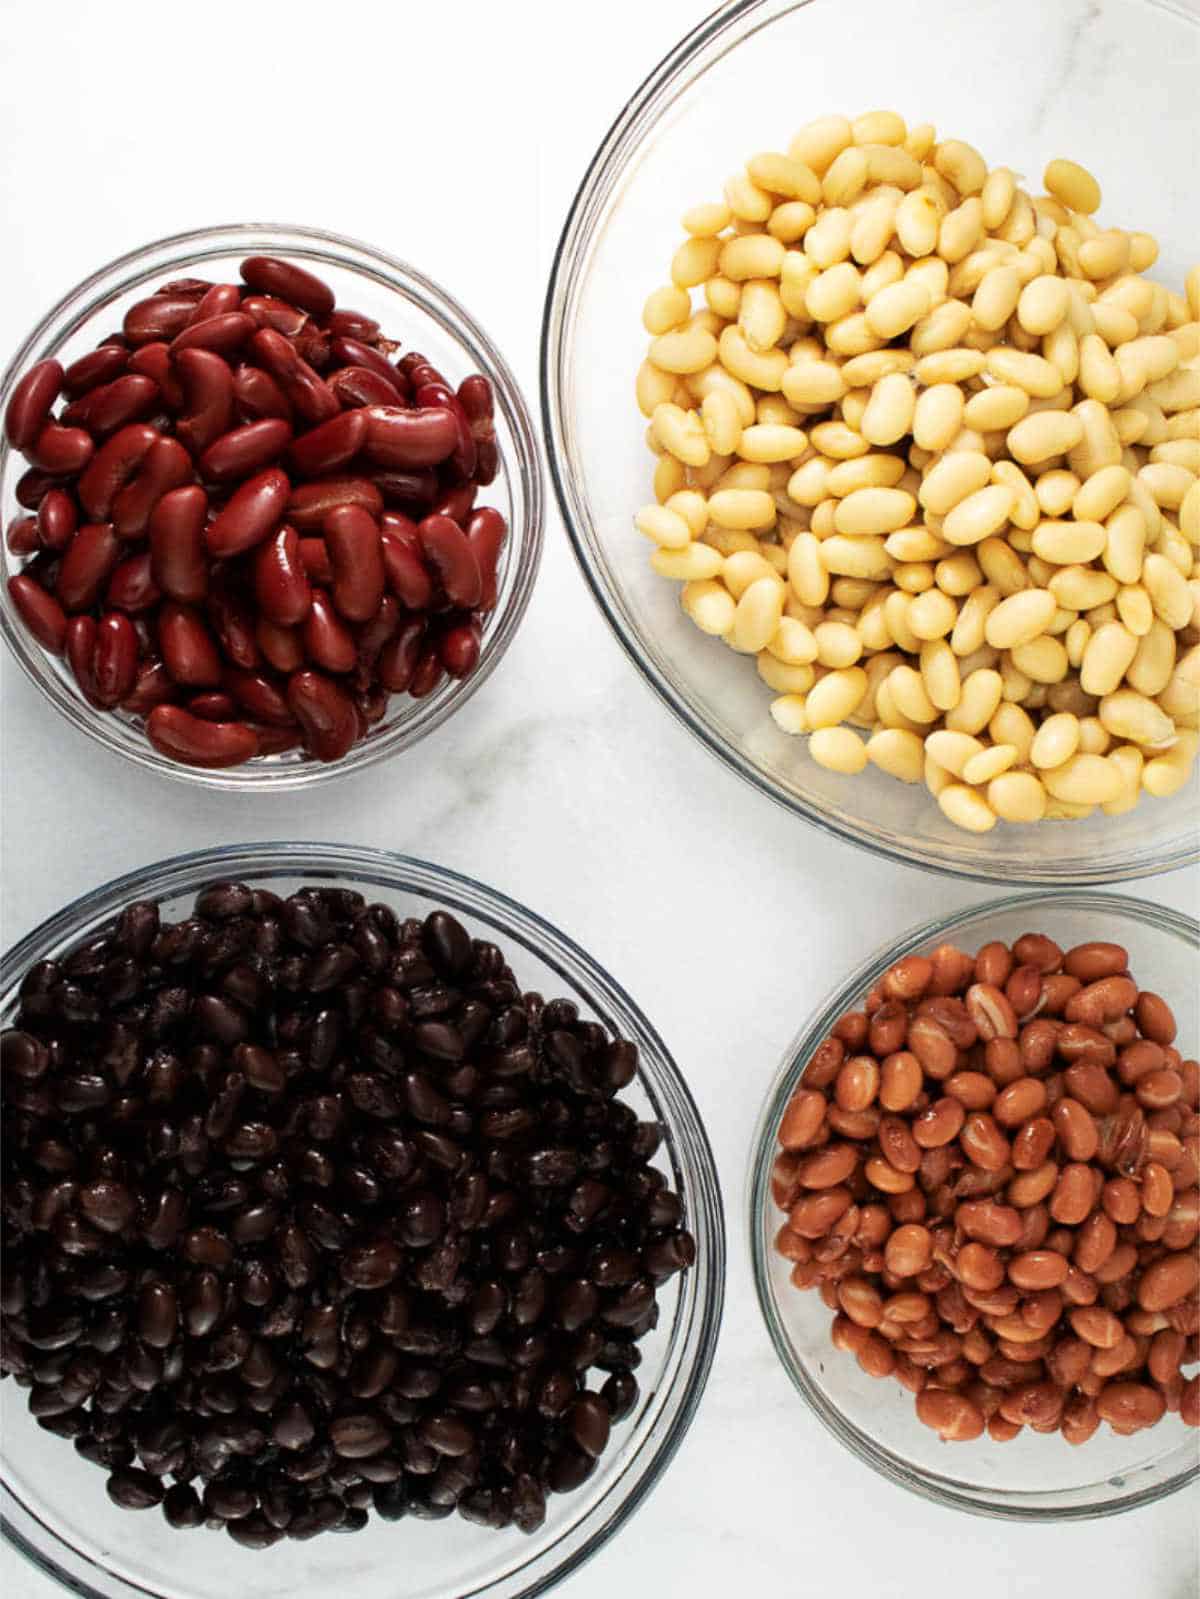 clear glass bowls of pinto beans, navy beans, black beans, and kidney beans.